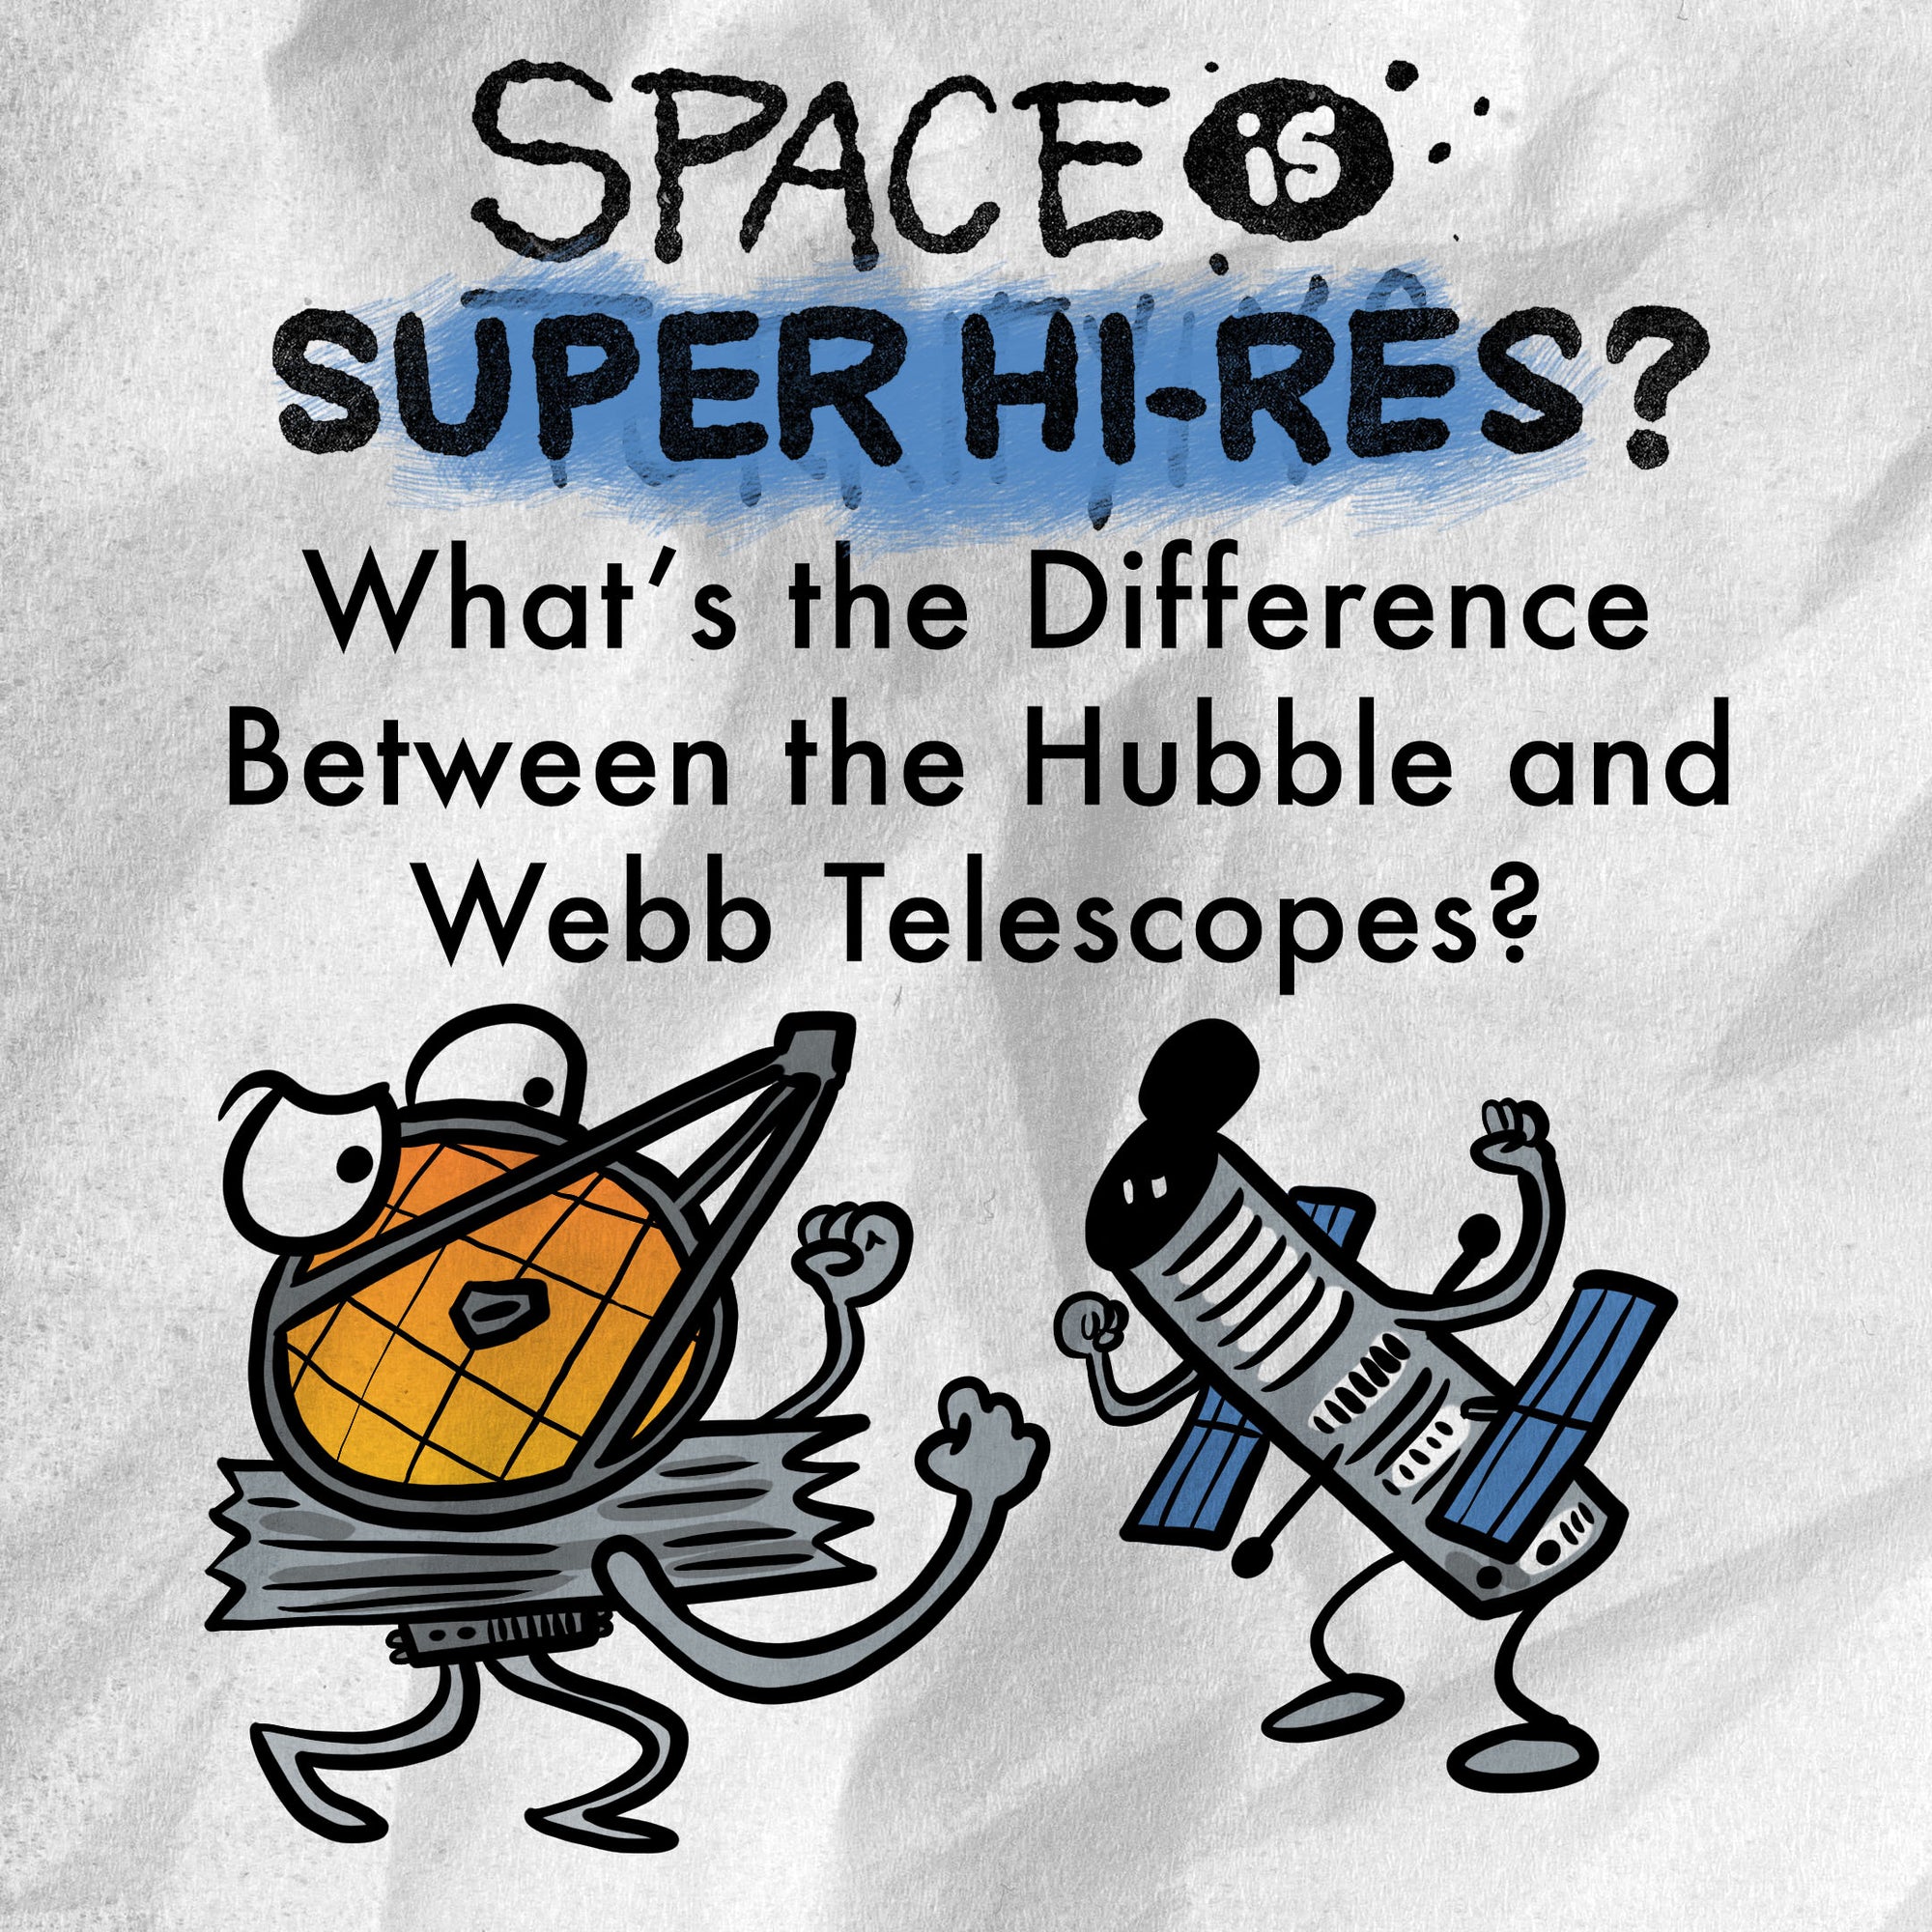 Space is Super High Res? The Difference Between the Hubble and Webb Telescopes